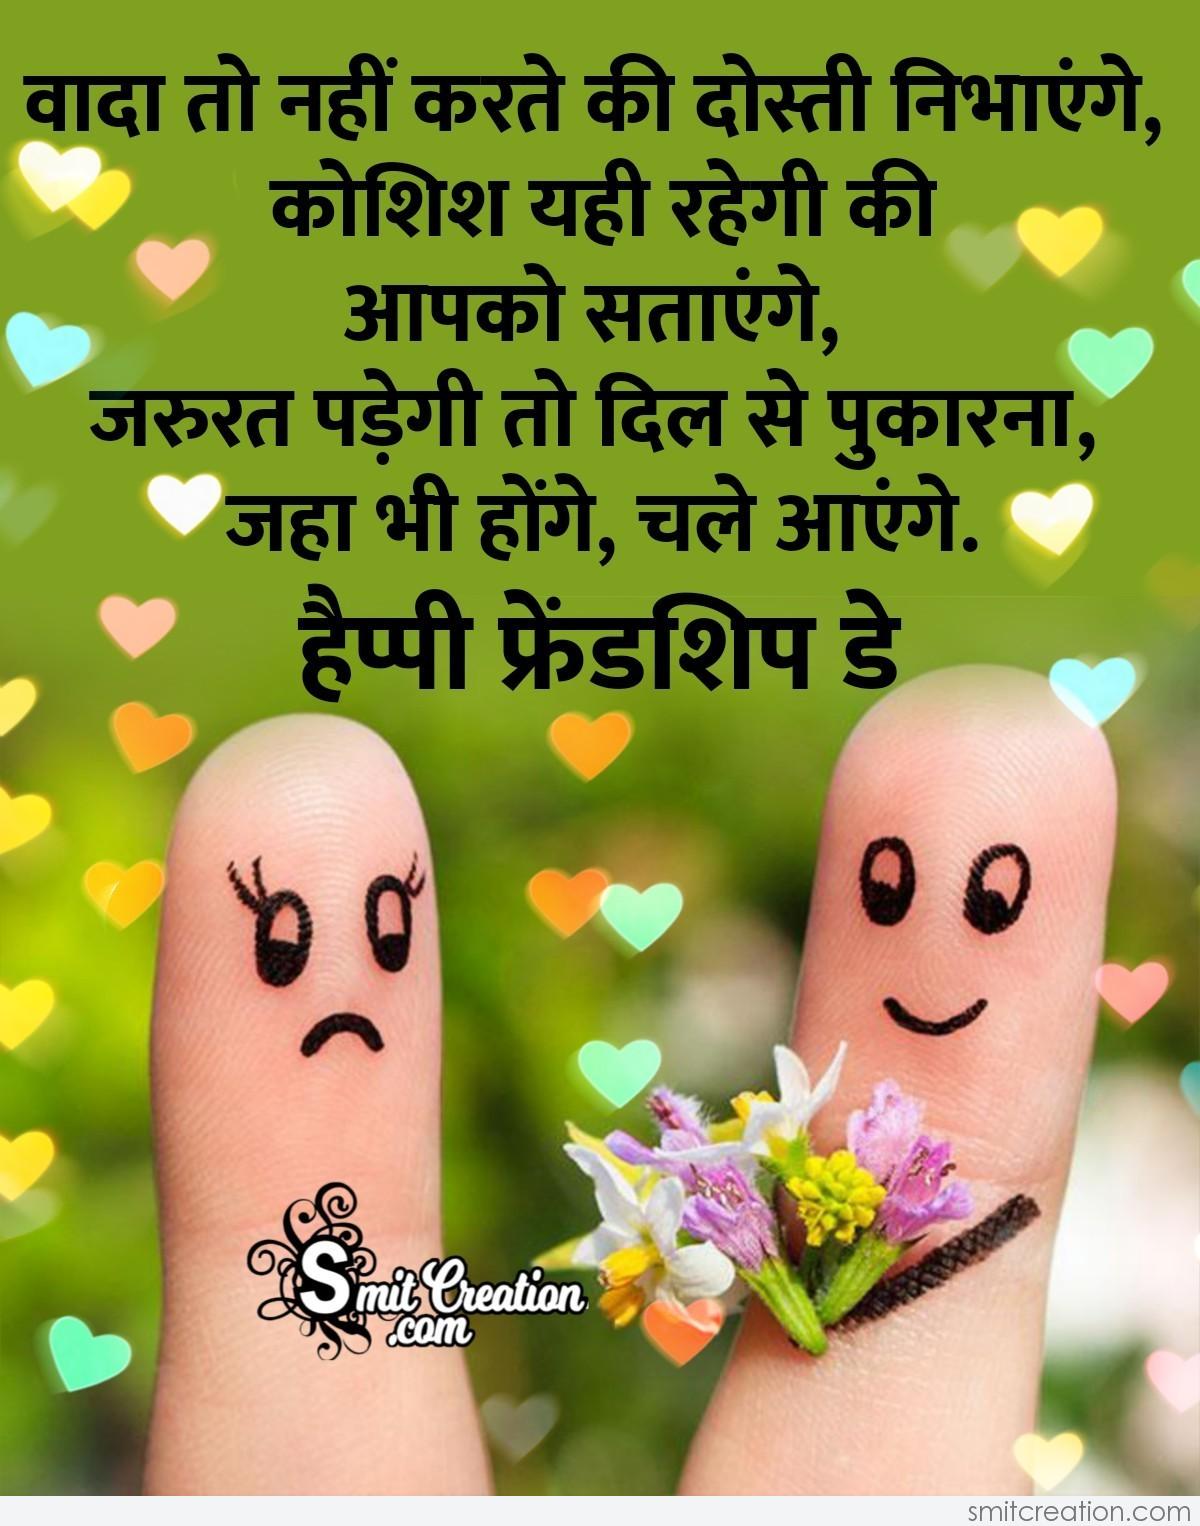 Happy Friendship Day Wishes In Hindi 